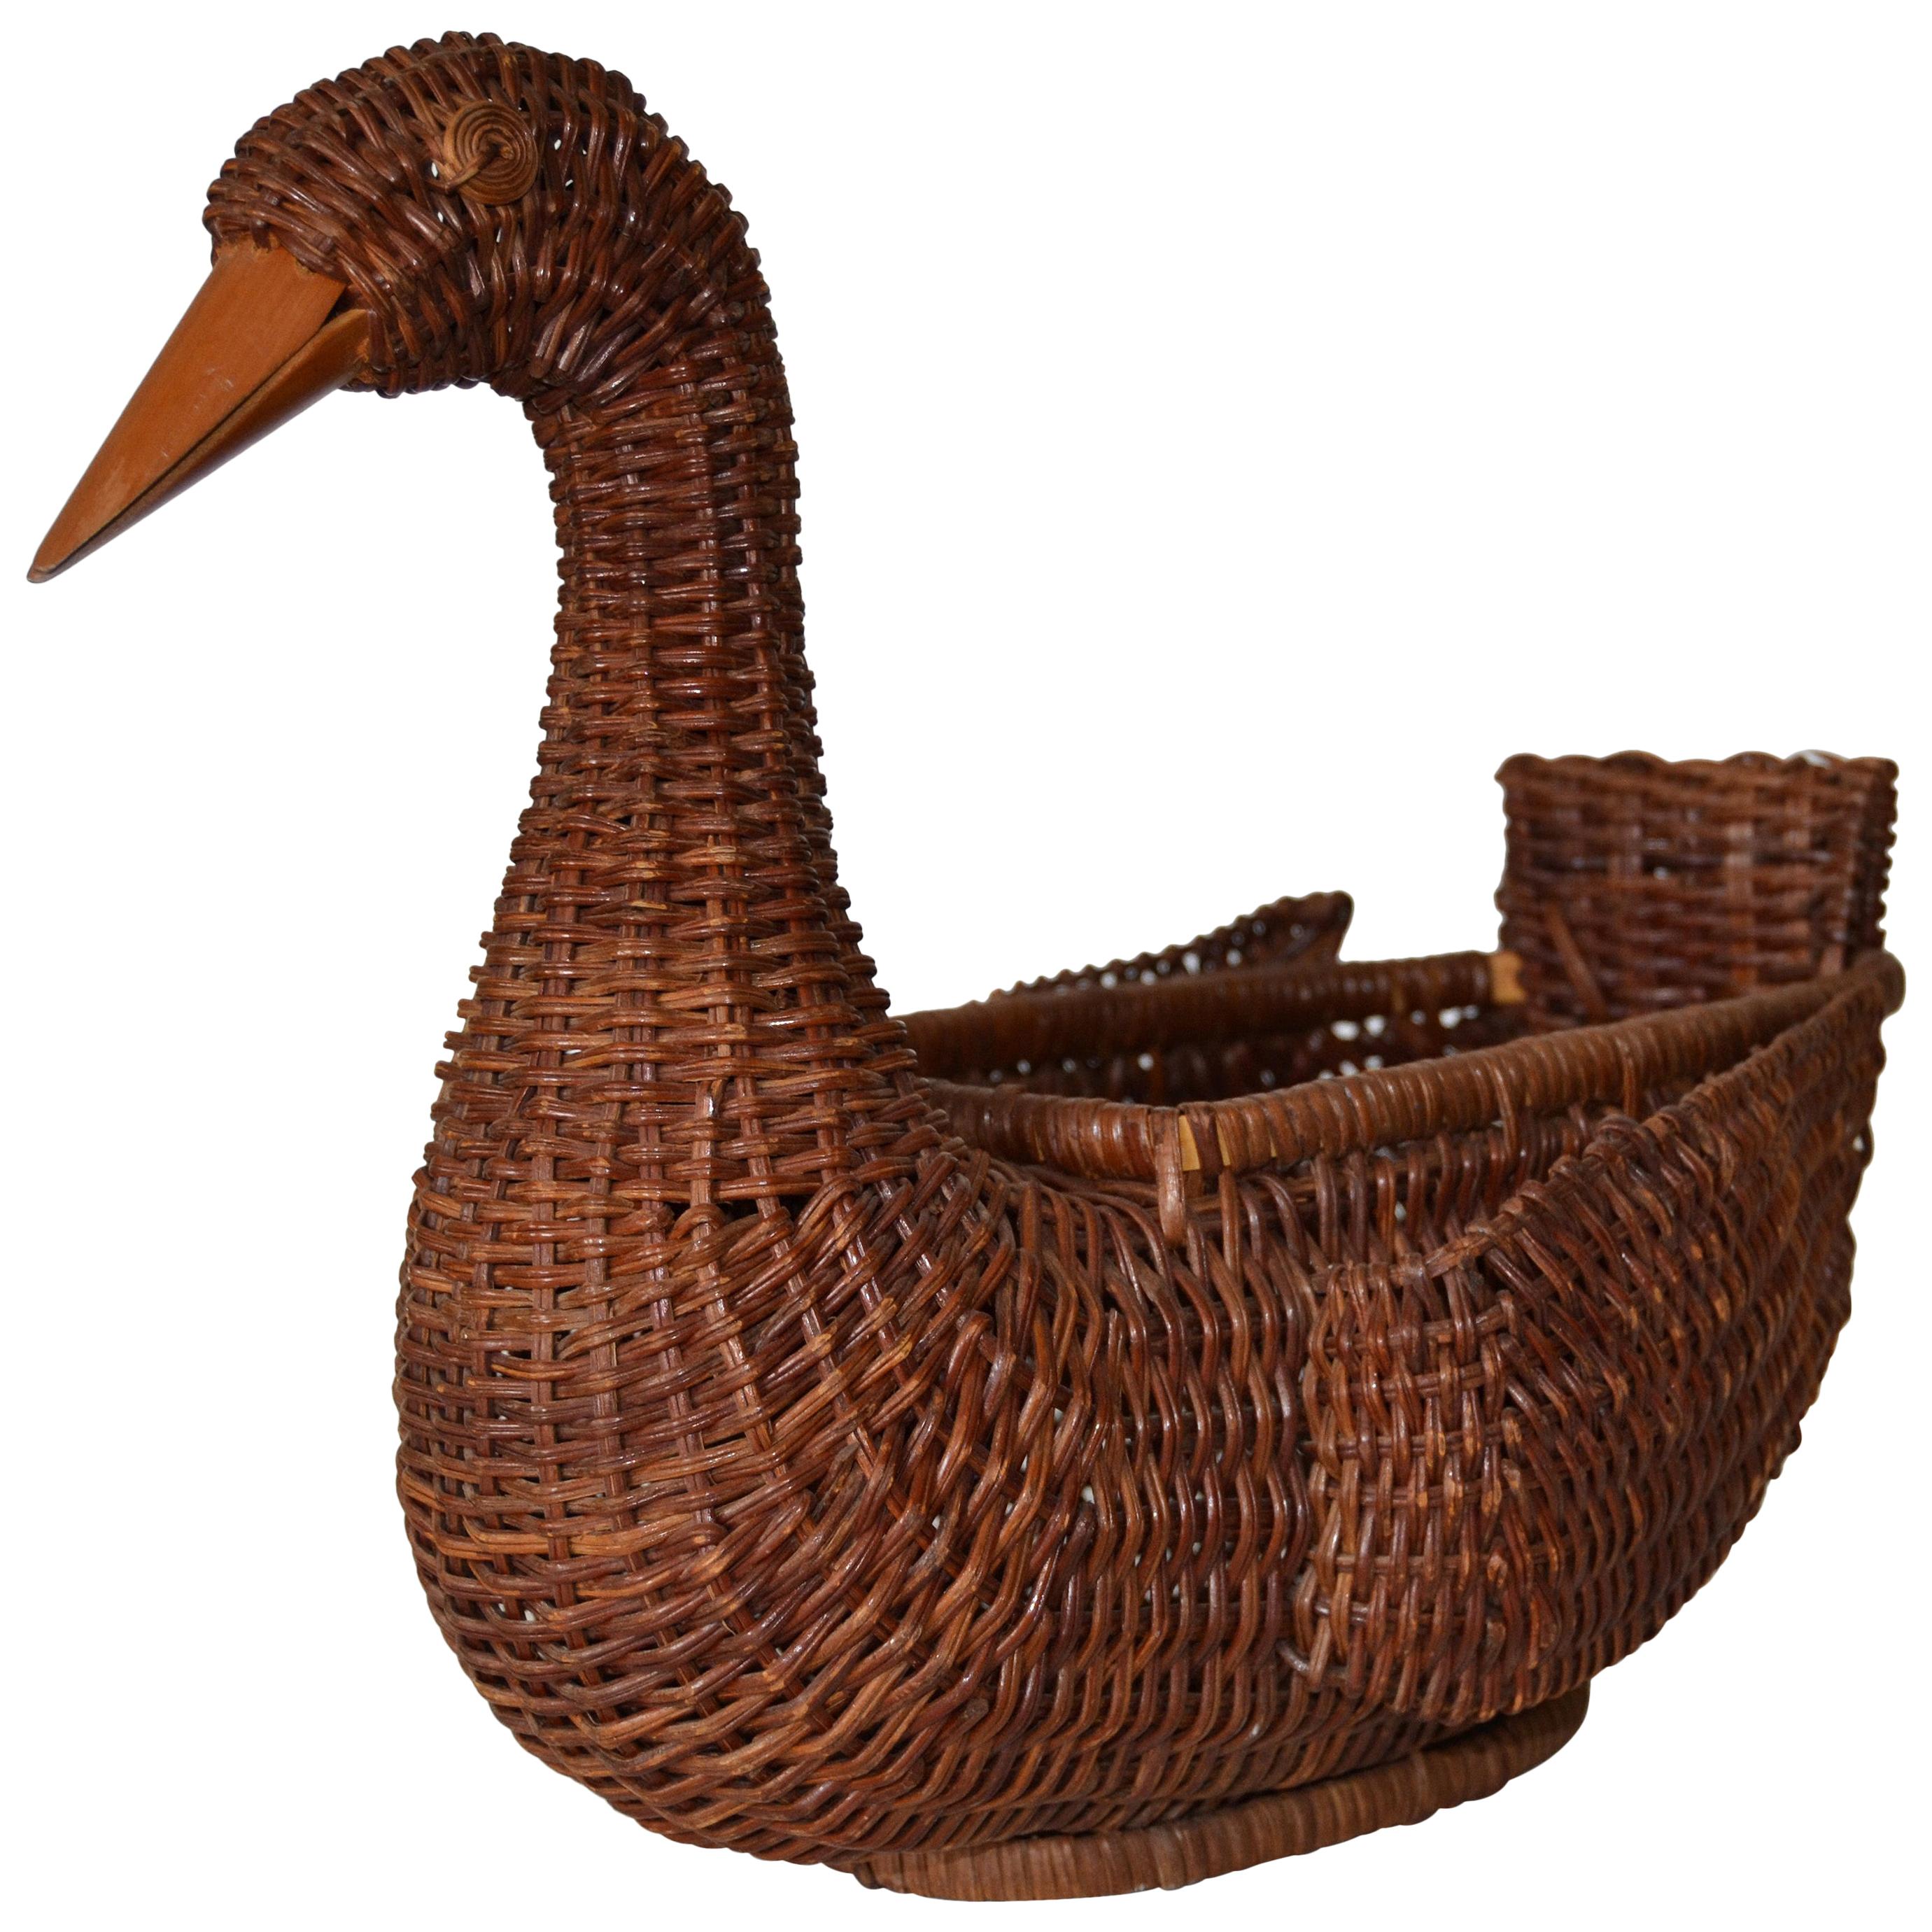 Boho Chic Decorative Handcrafted Woven Reed Brown Duck Basket, Animal Sculpture 